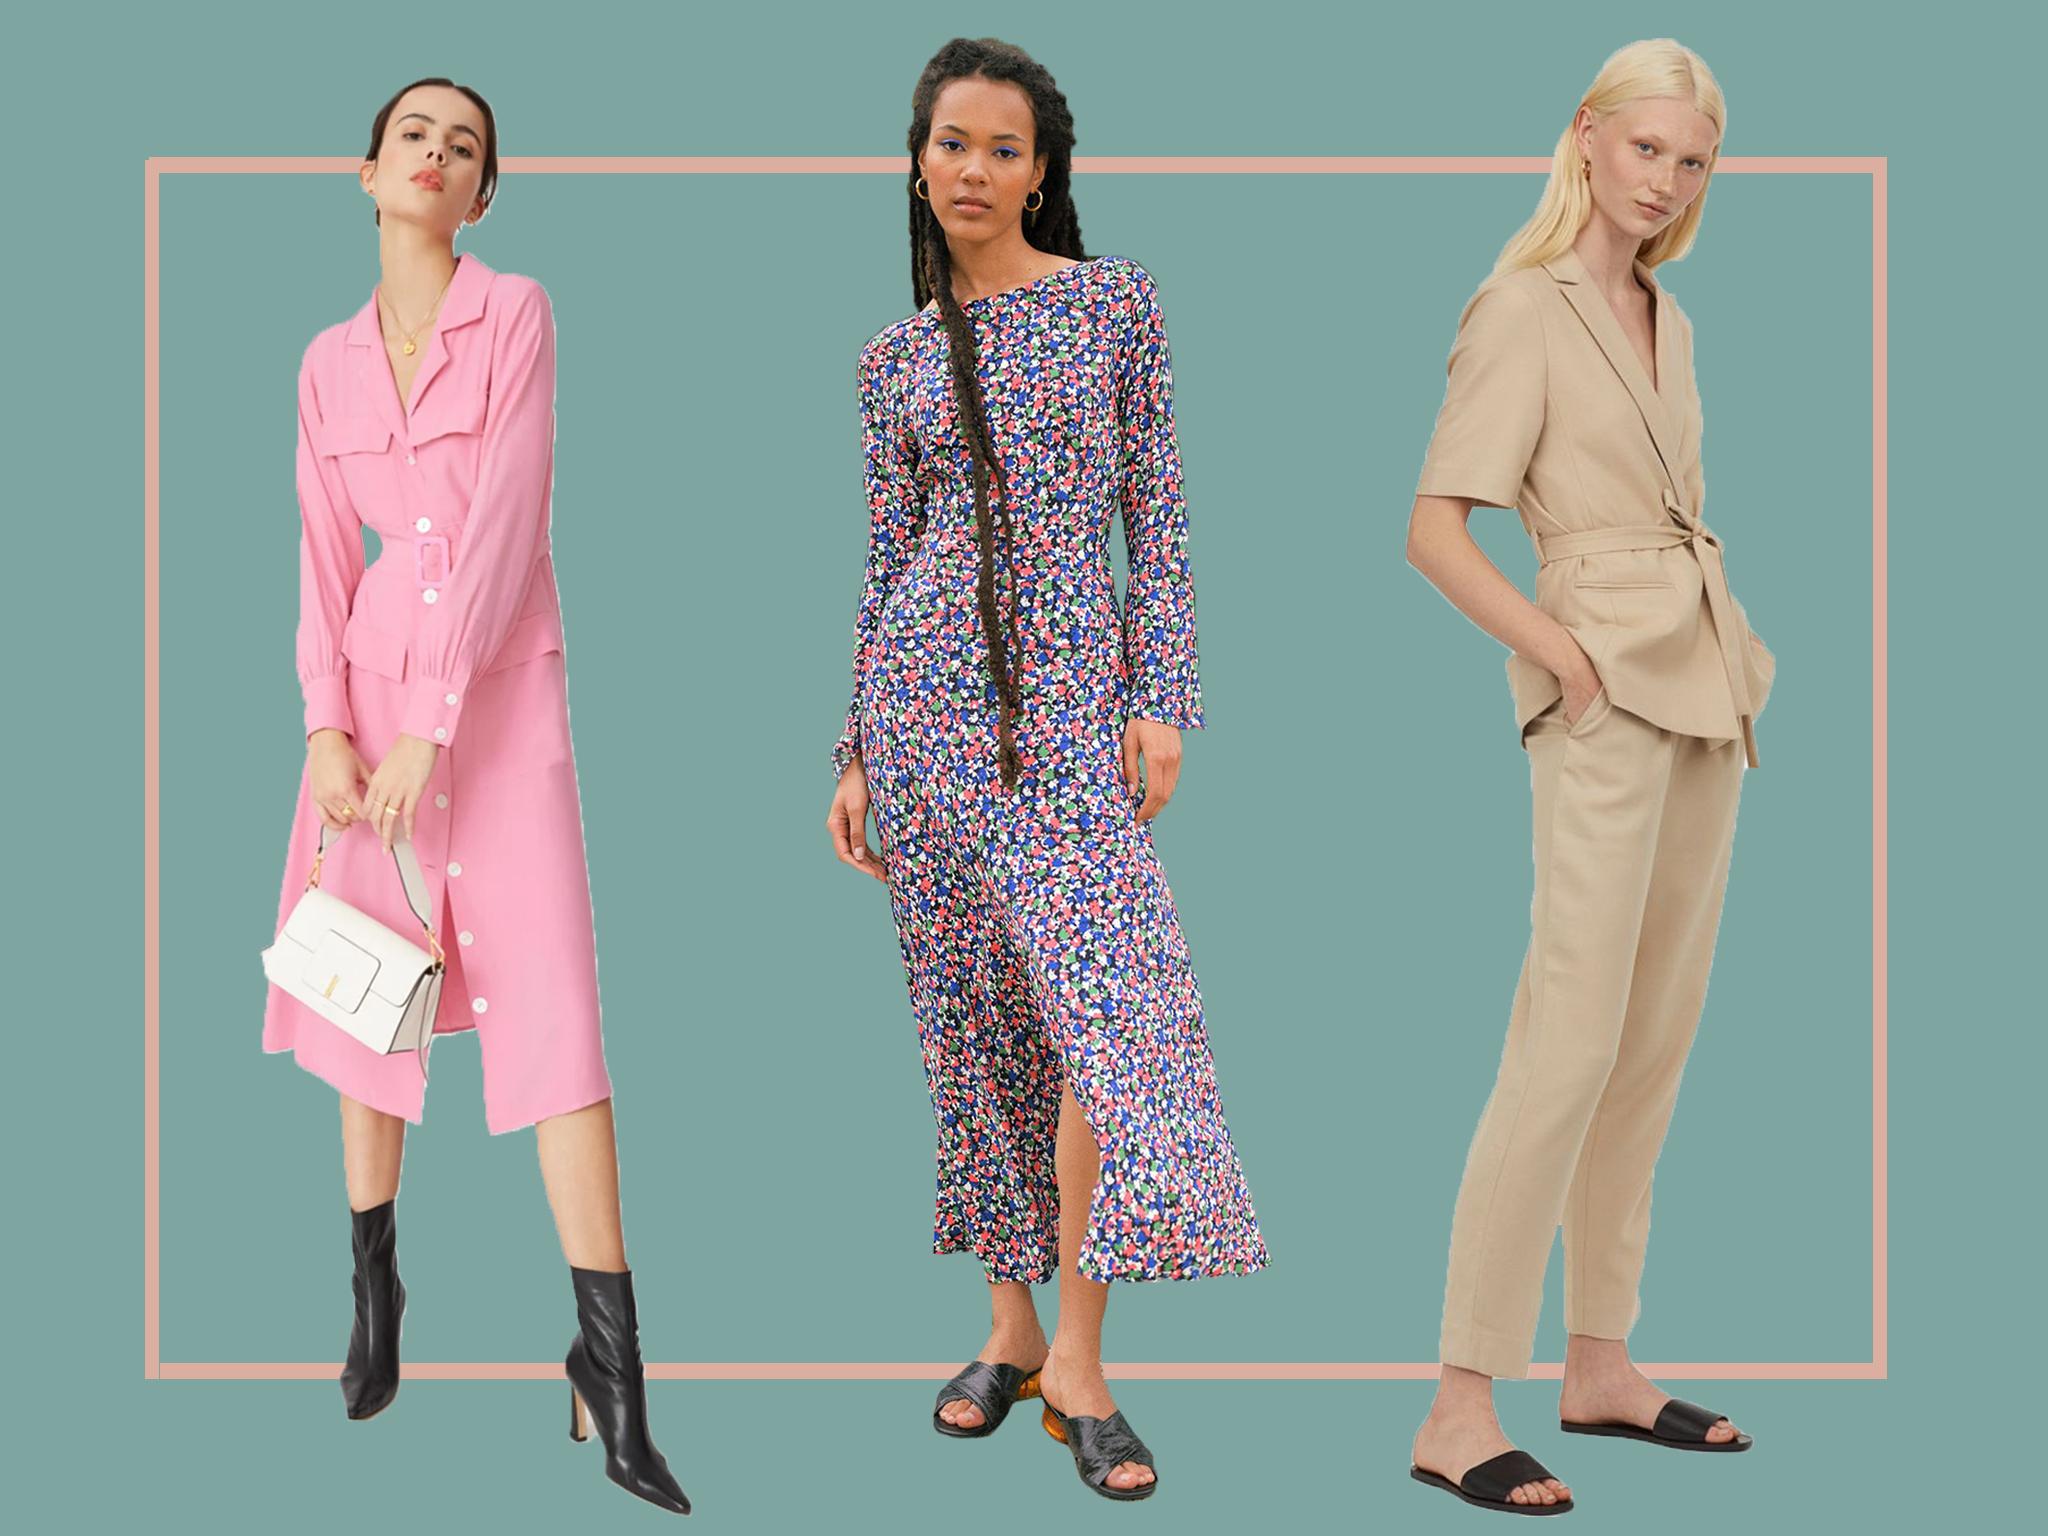 Workwear essentials: The staples you need for returning to the office, from  dresses to blazers | The Independent